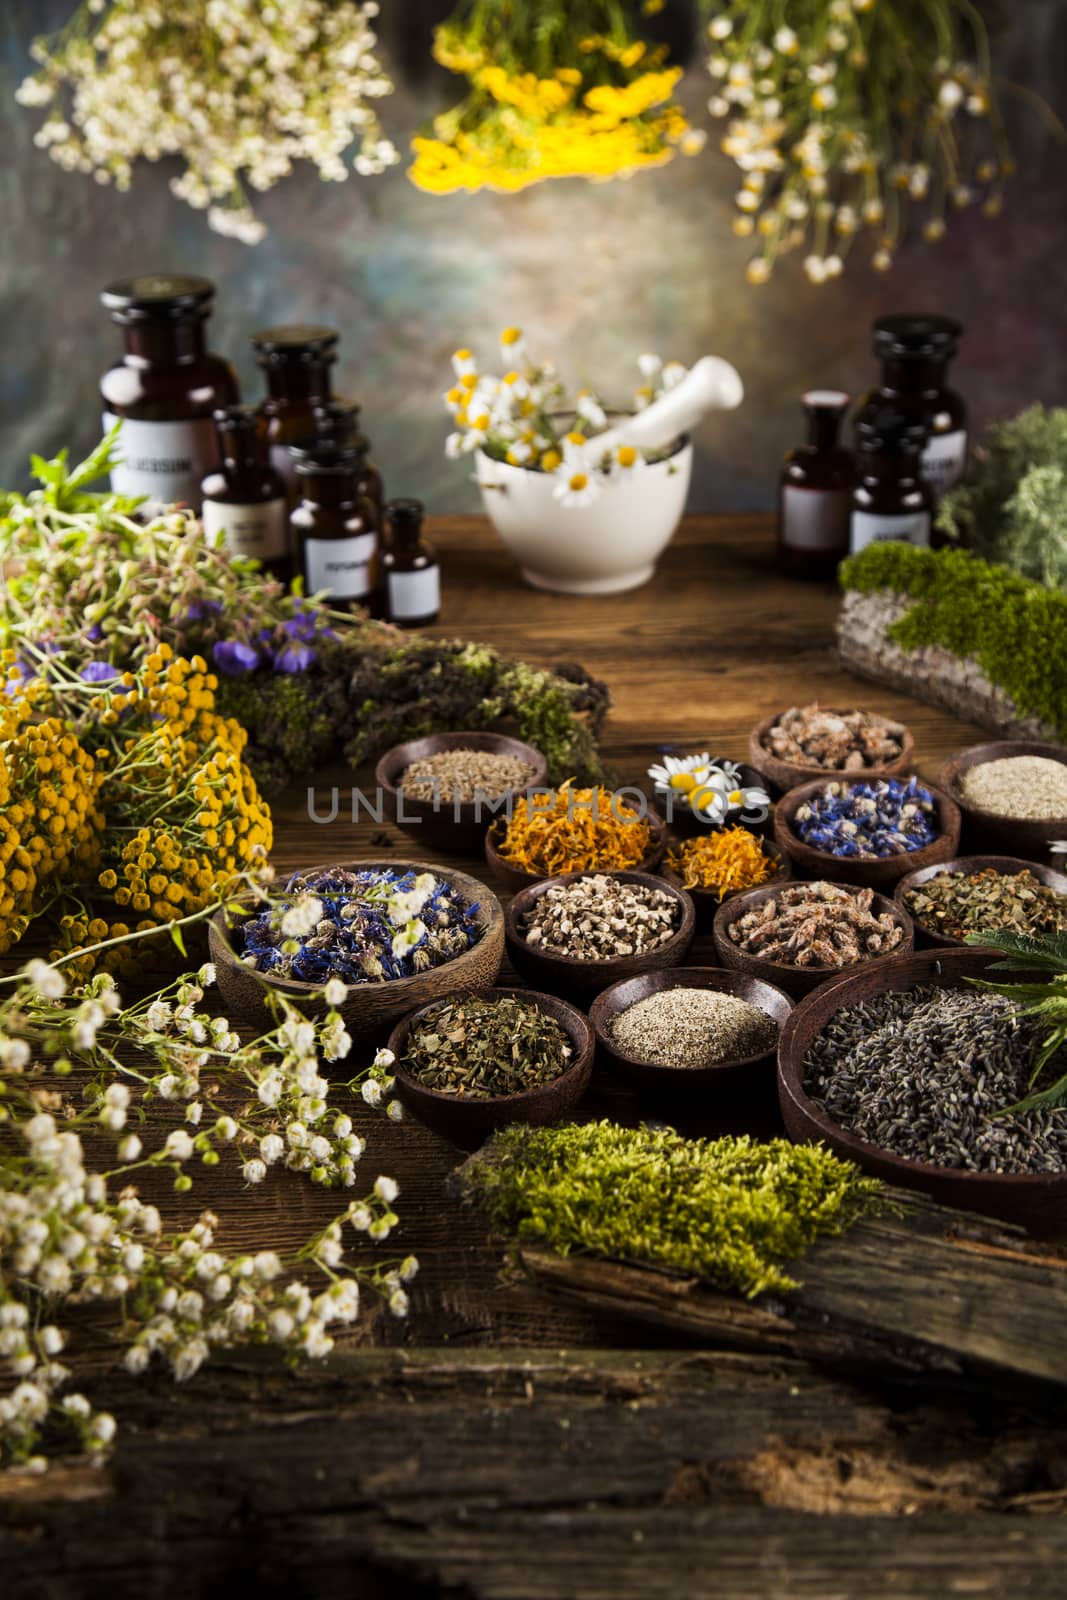 Natural remedy and mortar, healing herbs background